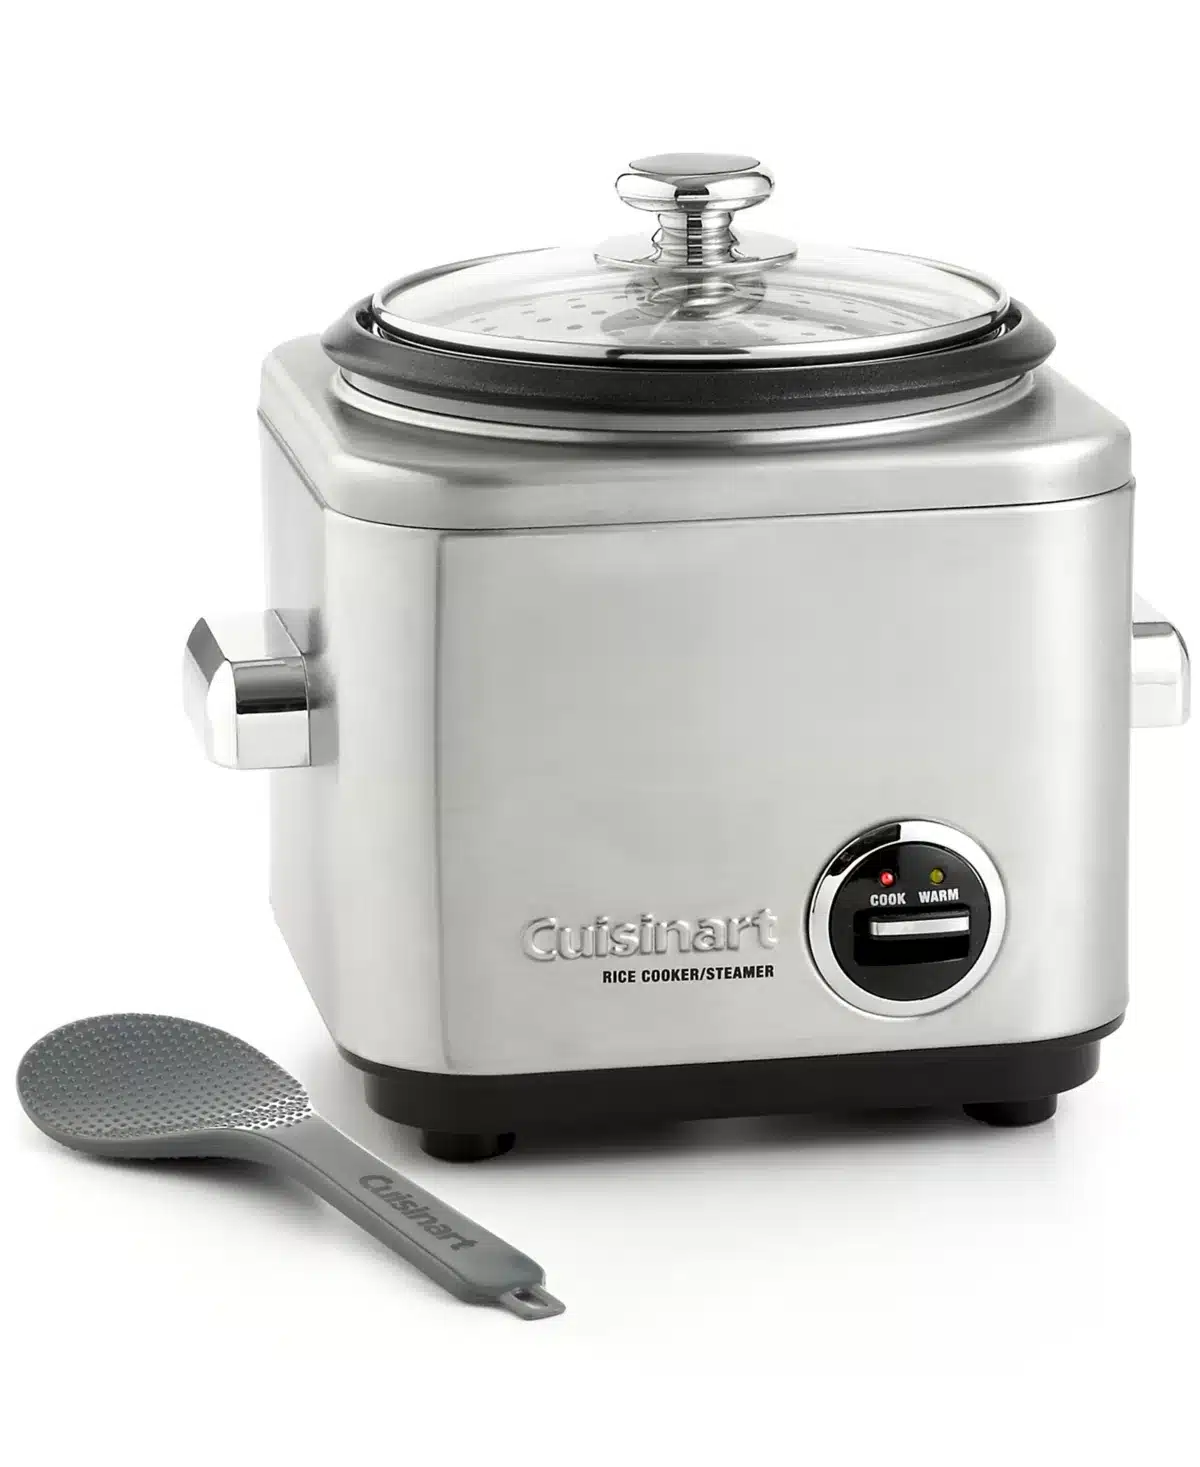 steaming with the cuisinart rice cooker